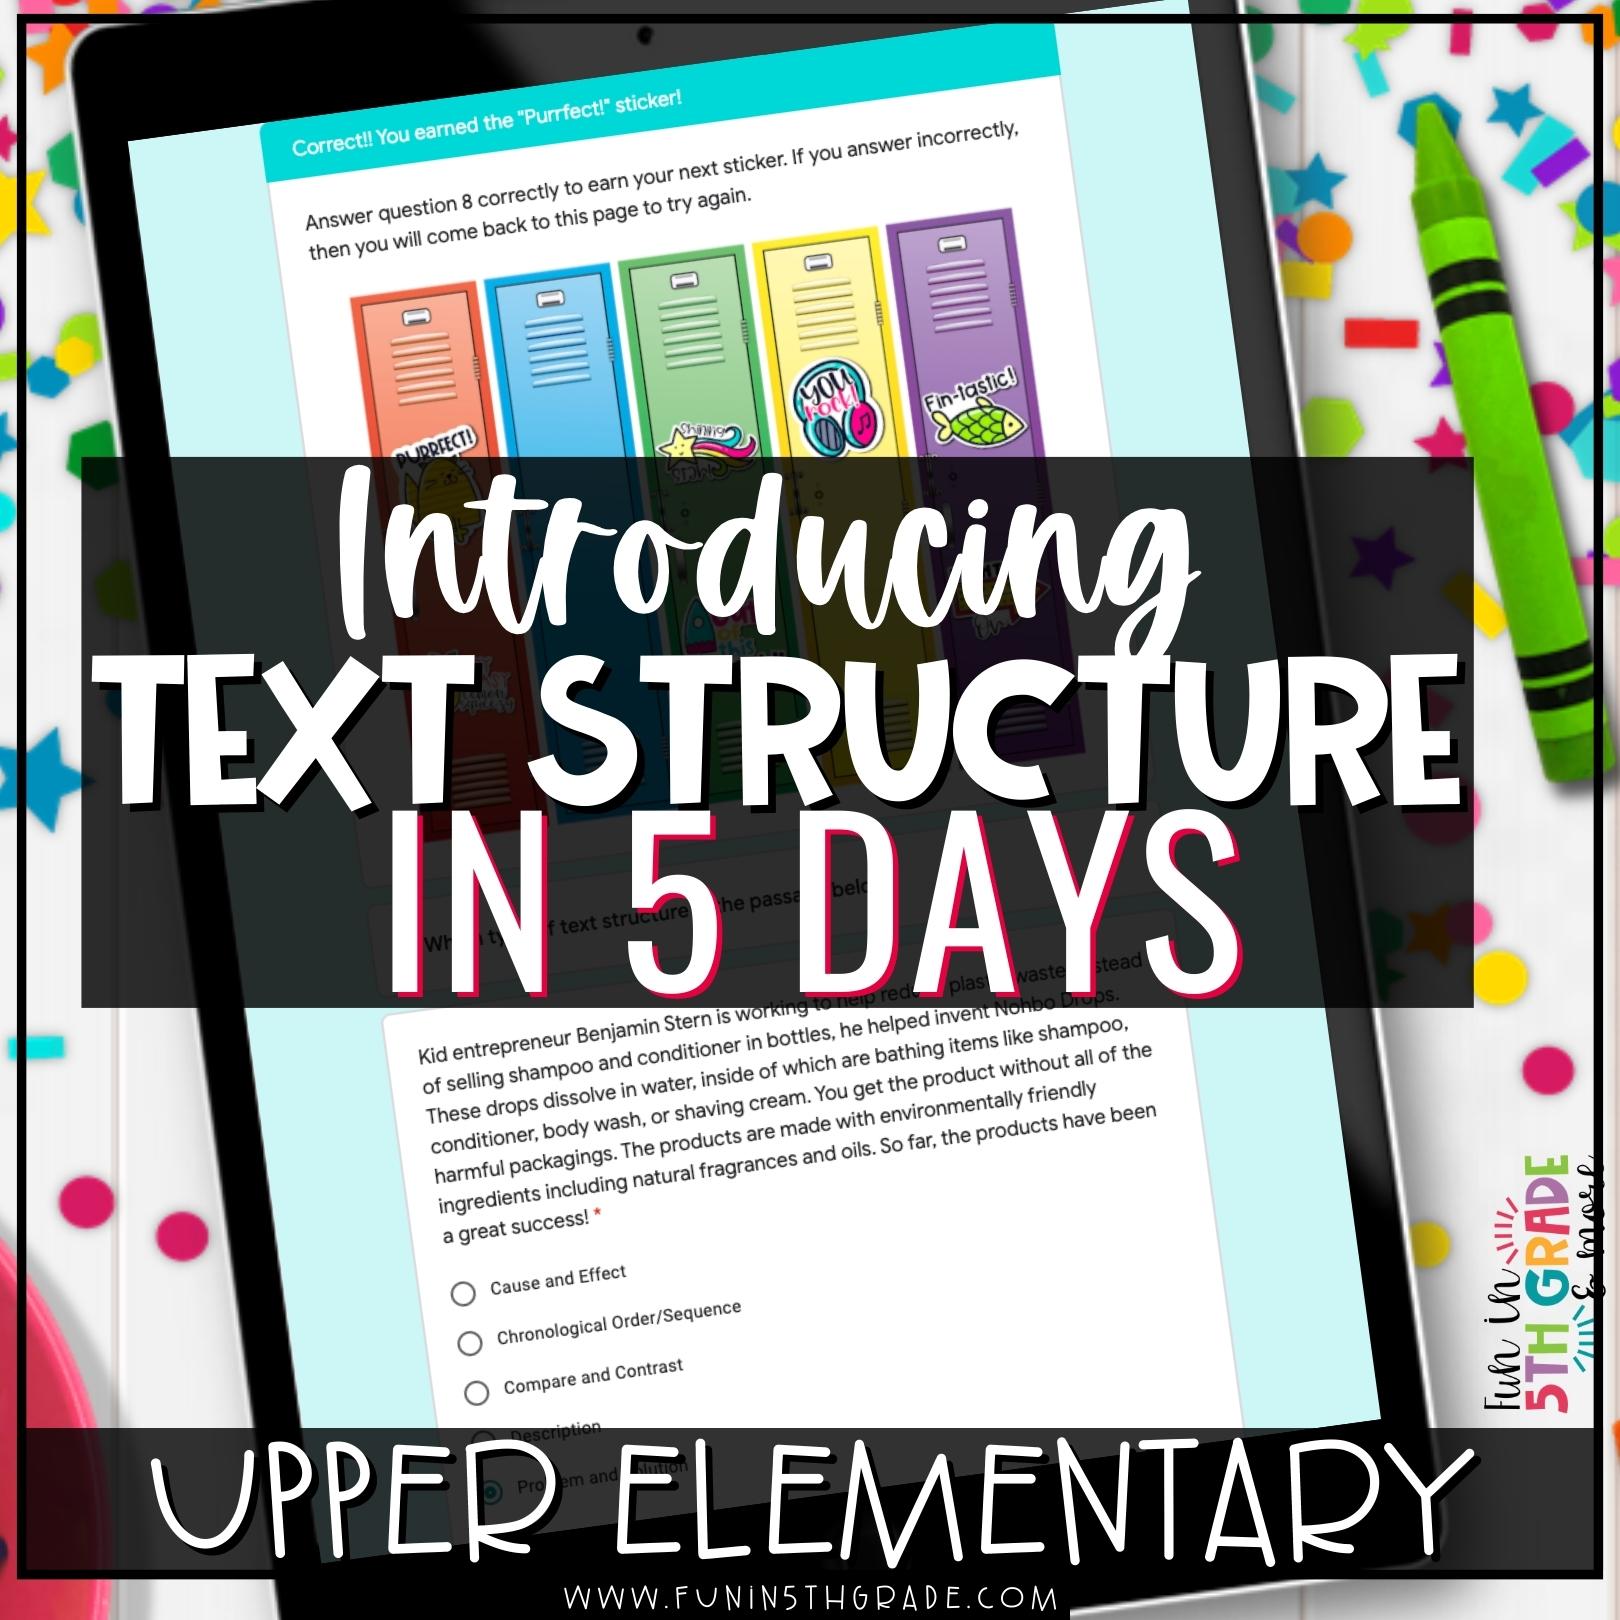 Introducing Text Structure in 5 days